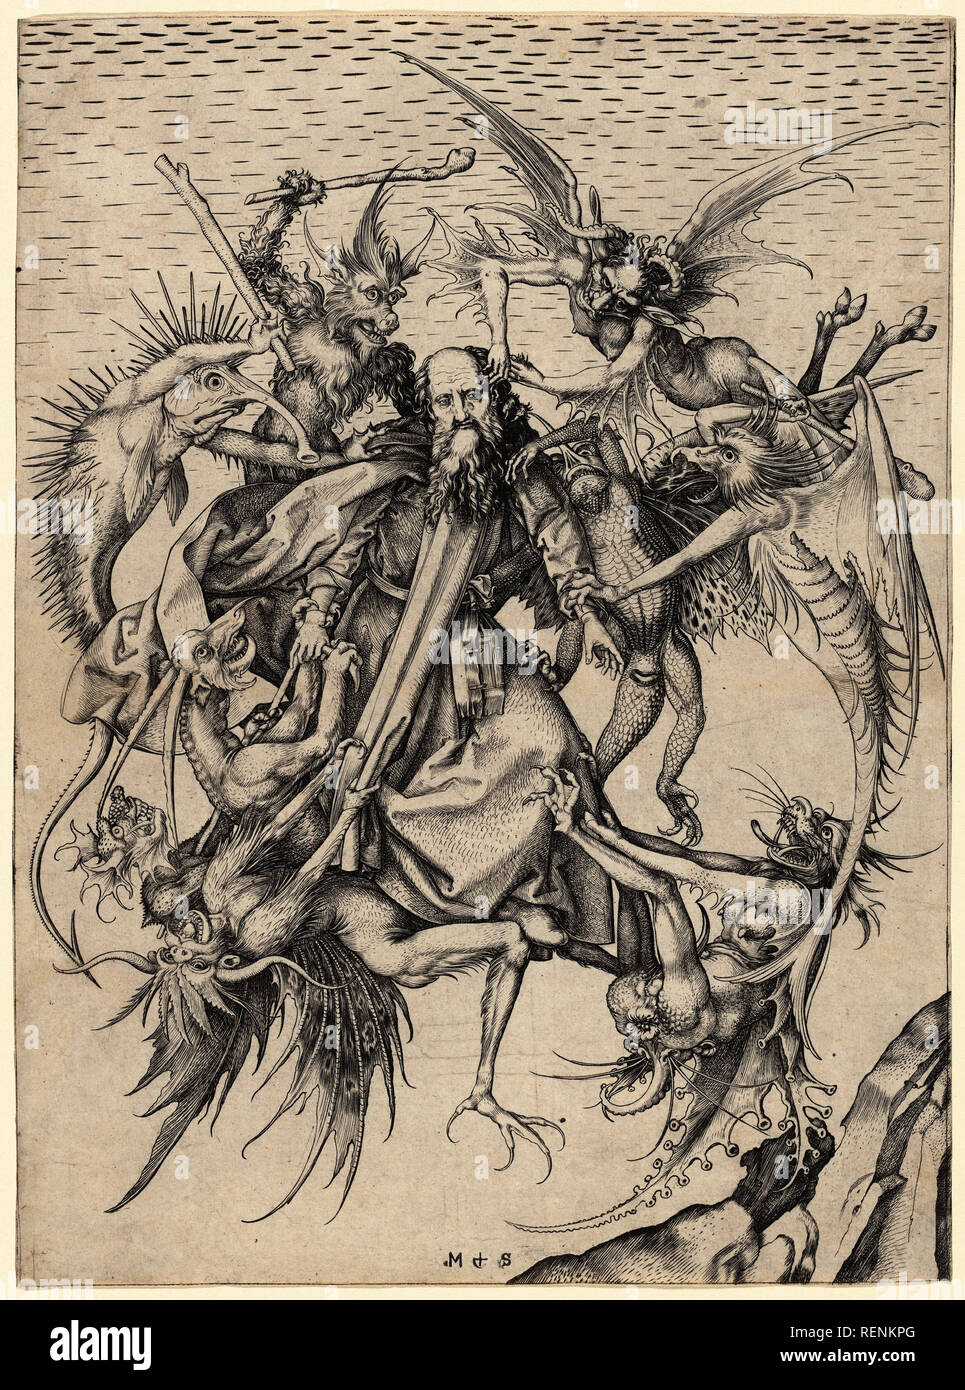 The Tribulations of Saint Anthony. Dated: c. 1470/1475. Dimensions: sheet (trimmed to plate mark): 31.5 x 23.2 cm (12 3/8 x 9 1/8 in.). Medium: engraving on laid paper. Museum: National Gallery of Art, Washington DC. Author: Martin Schongauer. Stock Photo